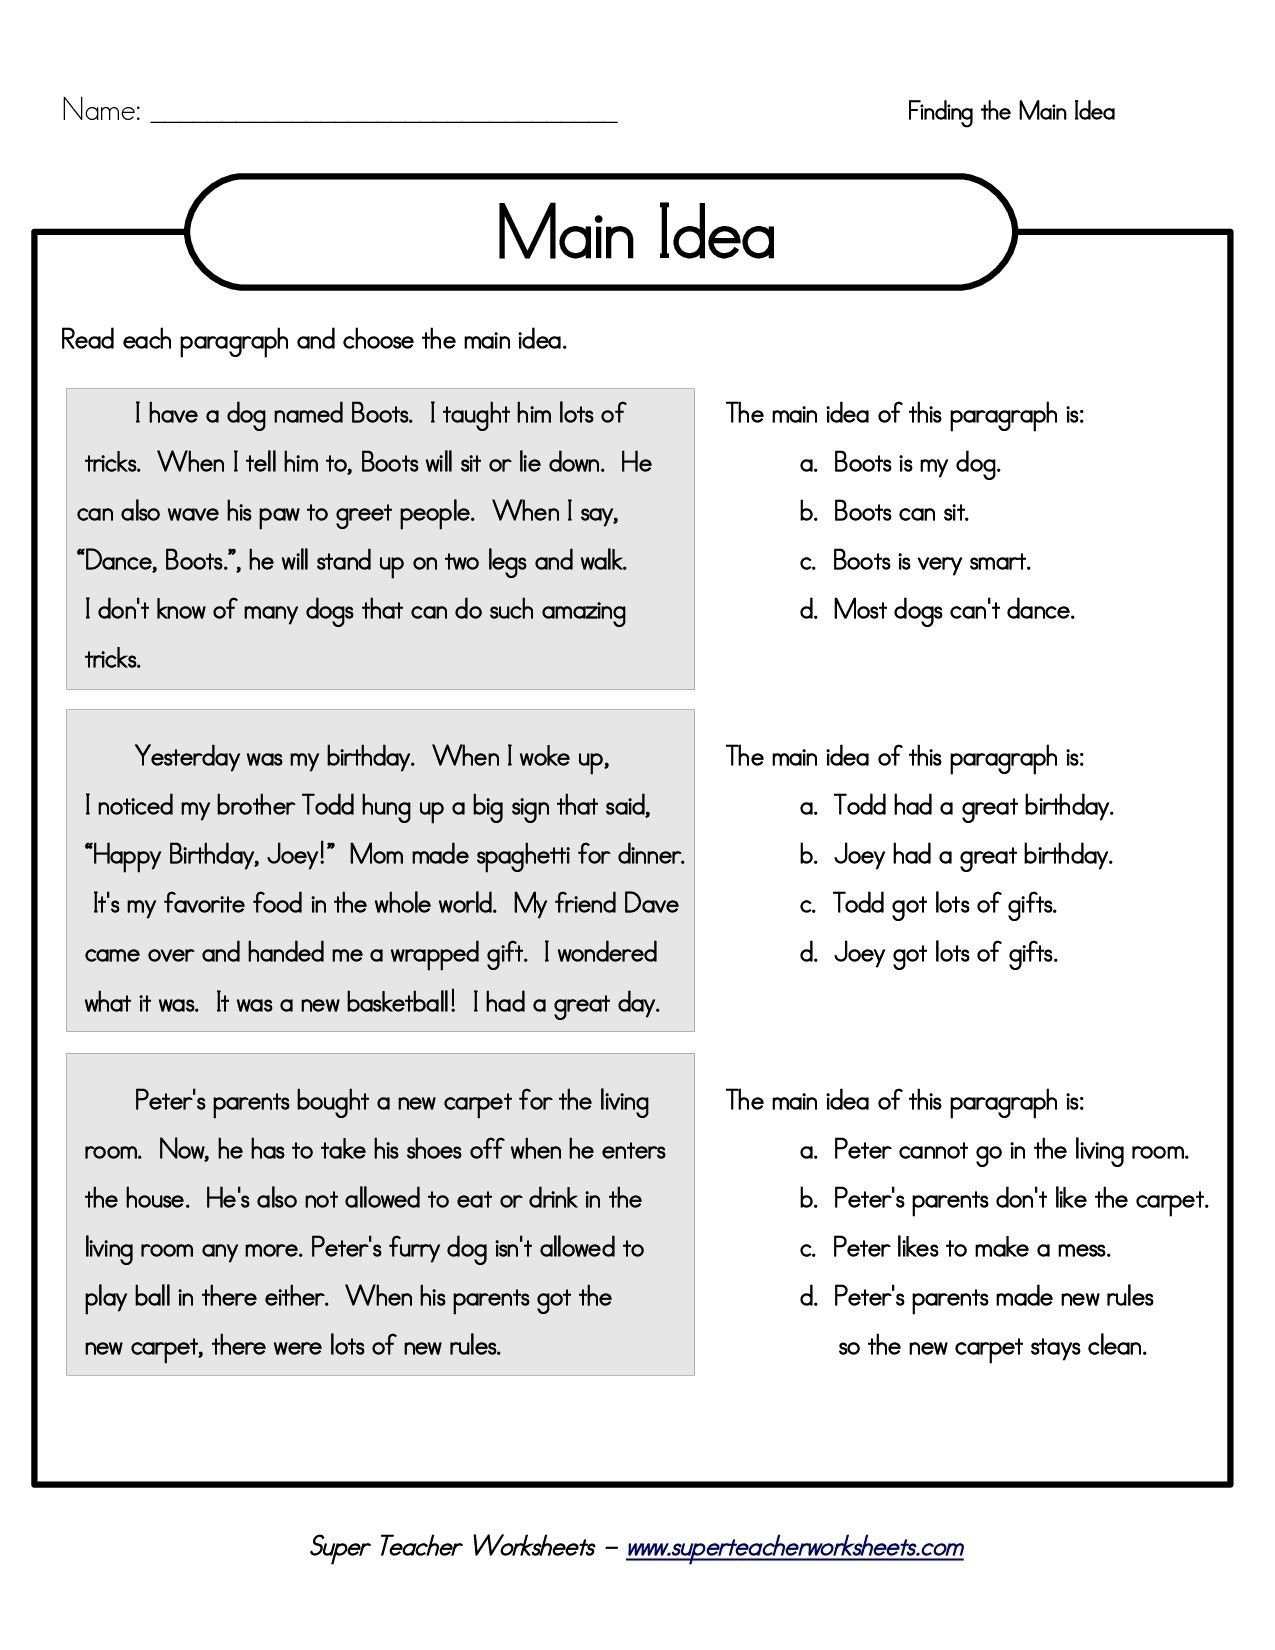 10 Gorgeous Main Idea And Supporting Details Games printable 5th grade main idea worksheets main idea and details 39 2022